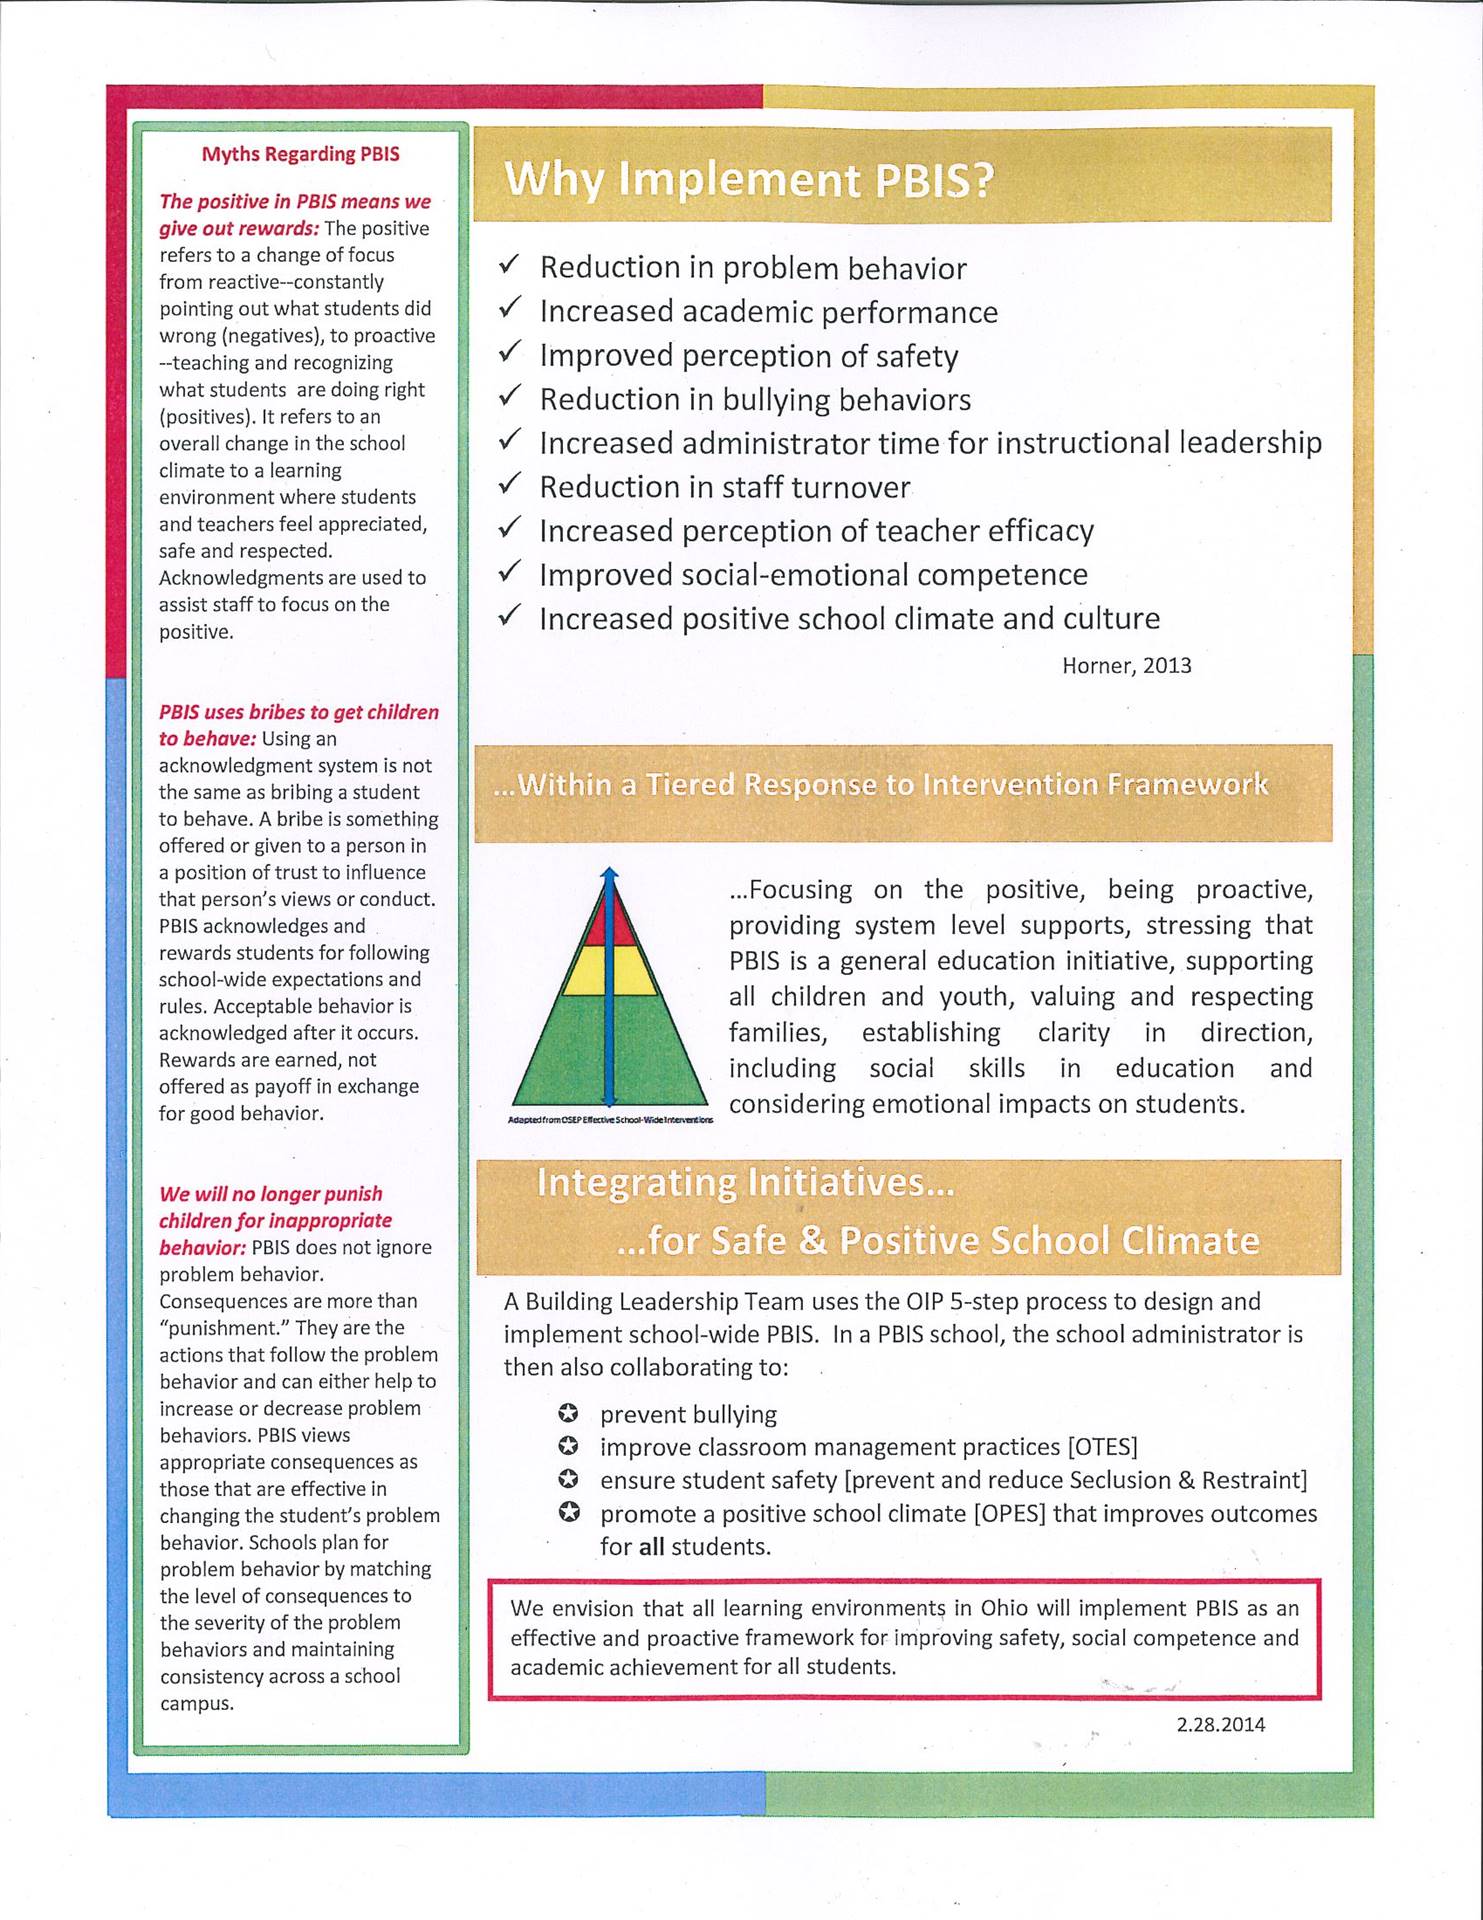 PBIS Facts Sheet Page 2